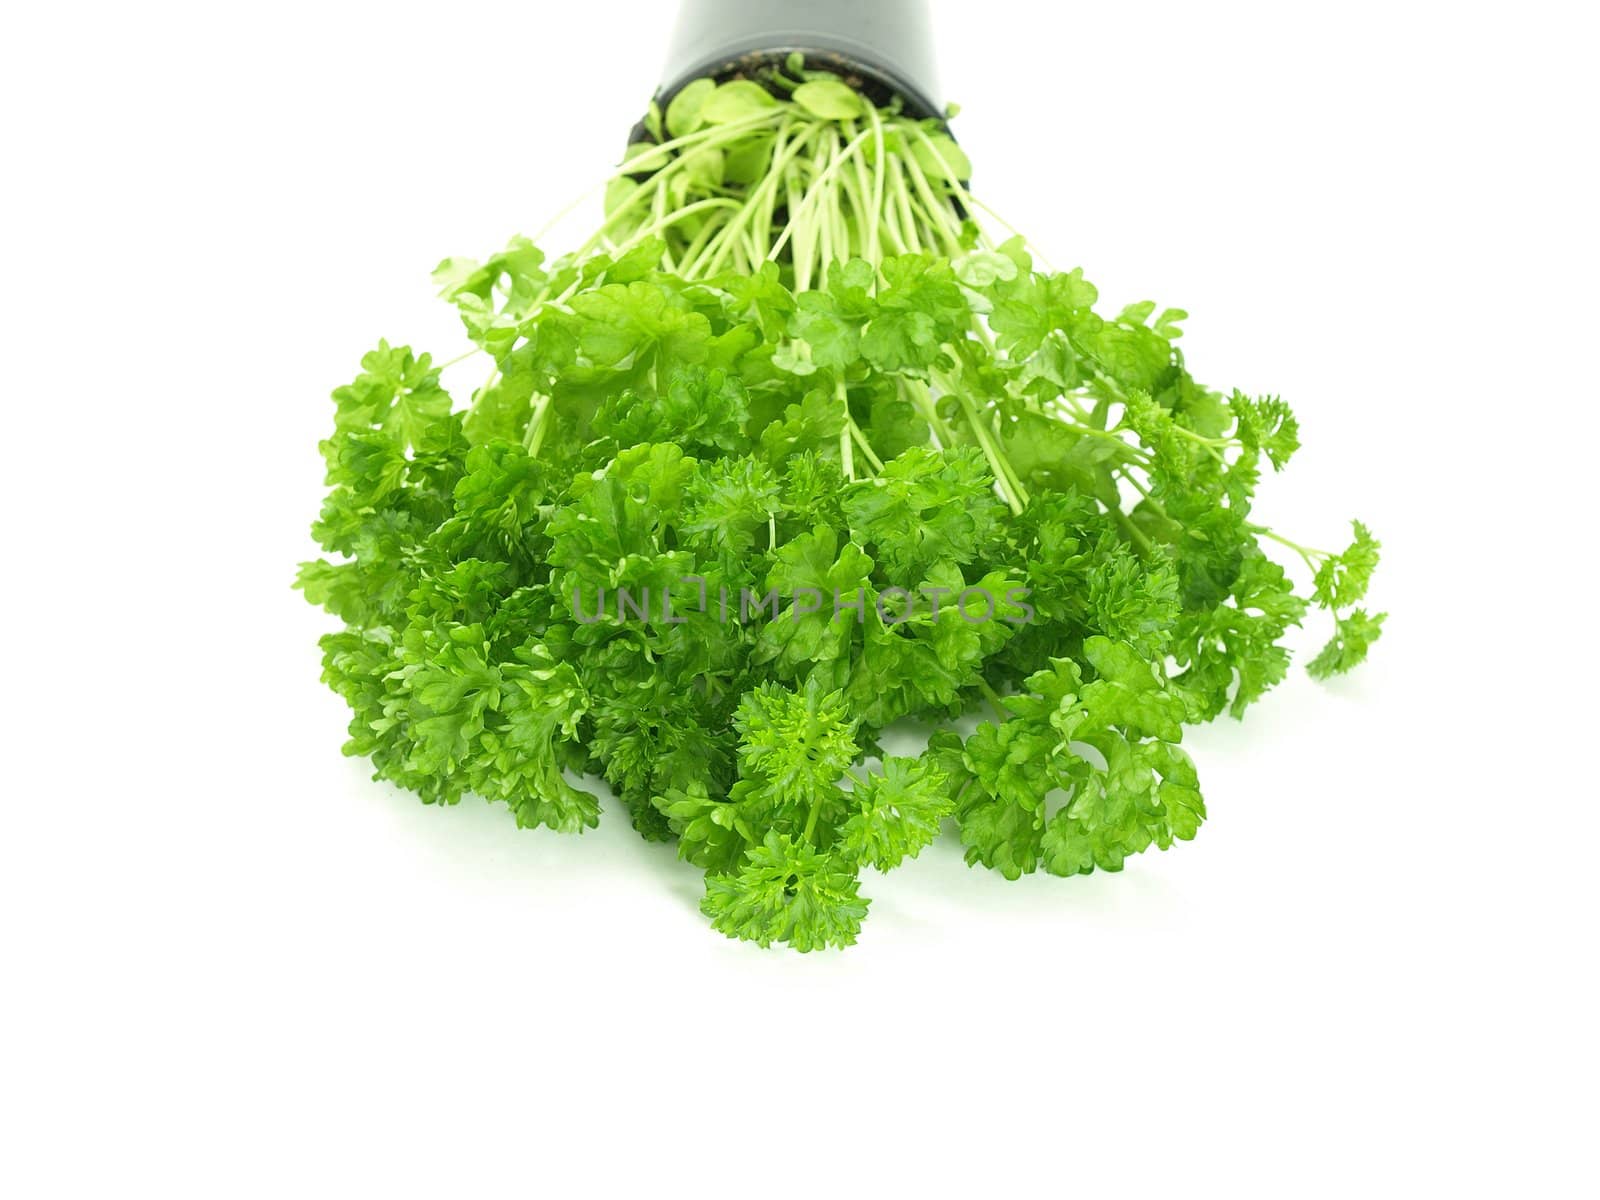 Fresh and green parsley leaves on white background.